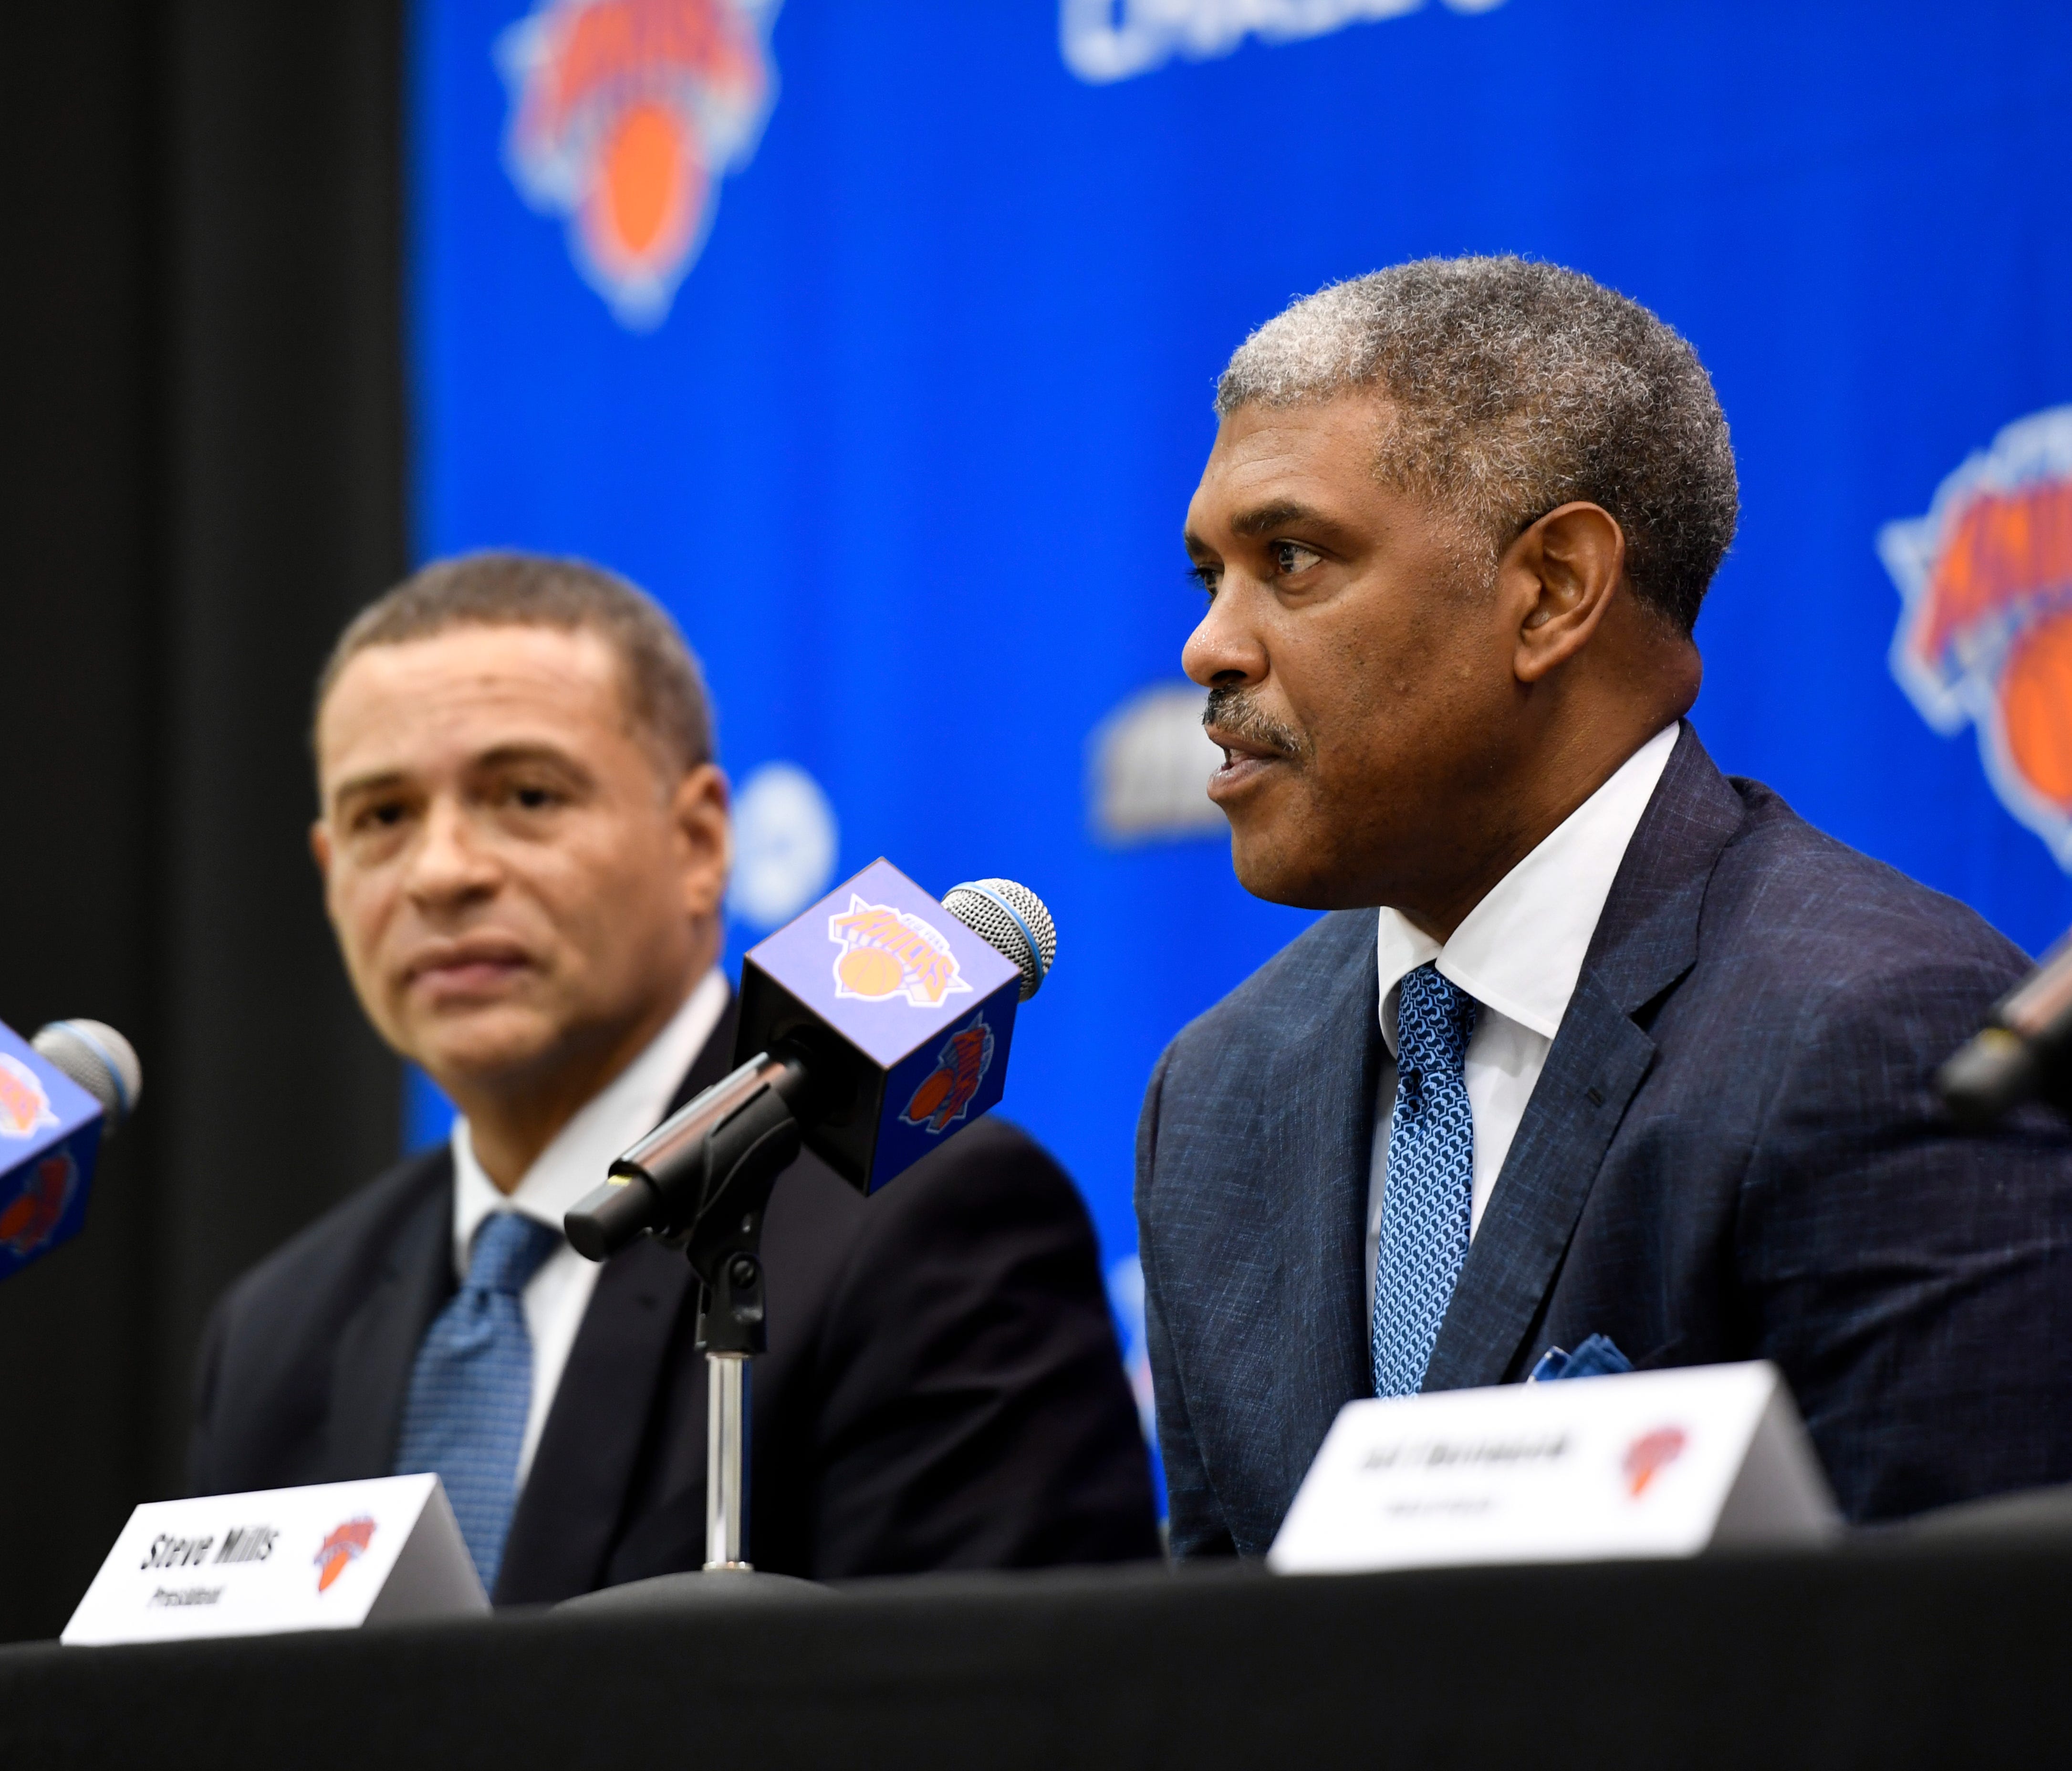 New York Knicks president Steve Mills, right, introduces new general manager Scott Perry, left, during a press conference at the Knicks Training Facility in Tarrytown, NY on Monday, July 17, 2017.